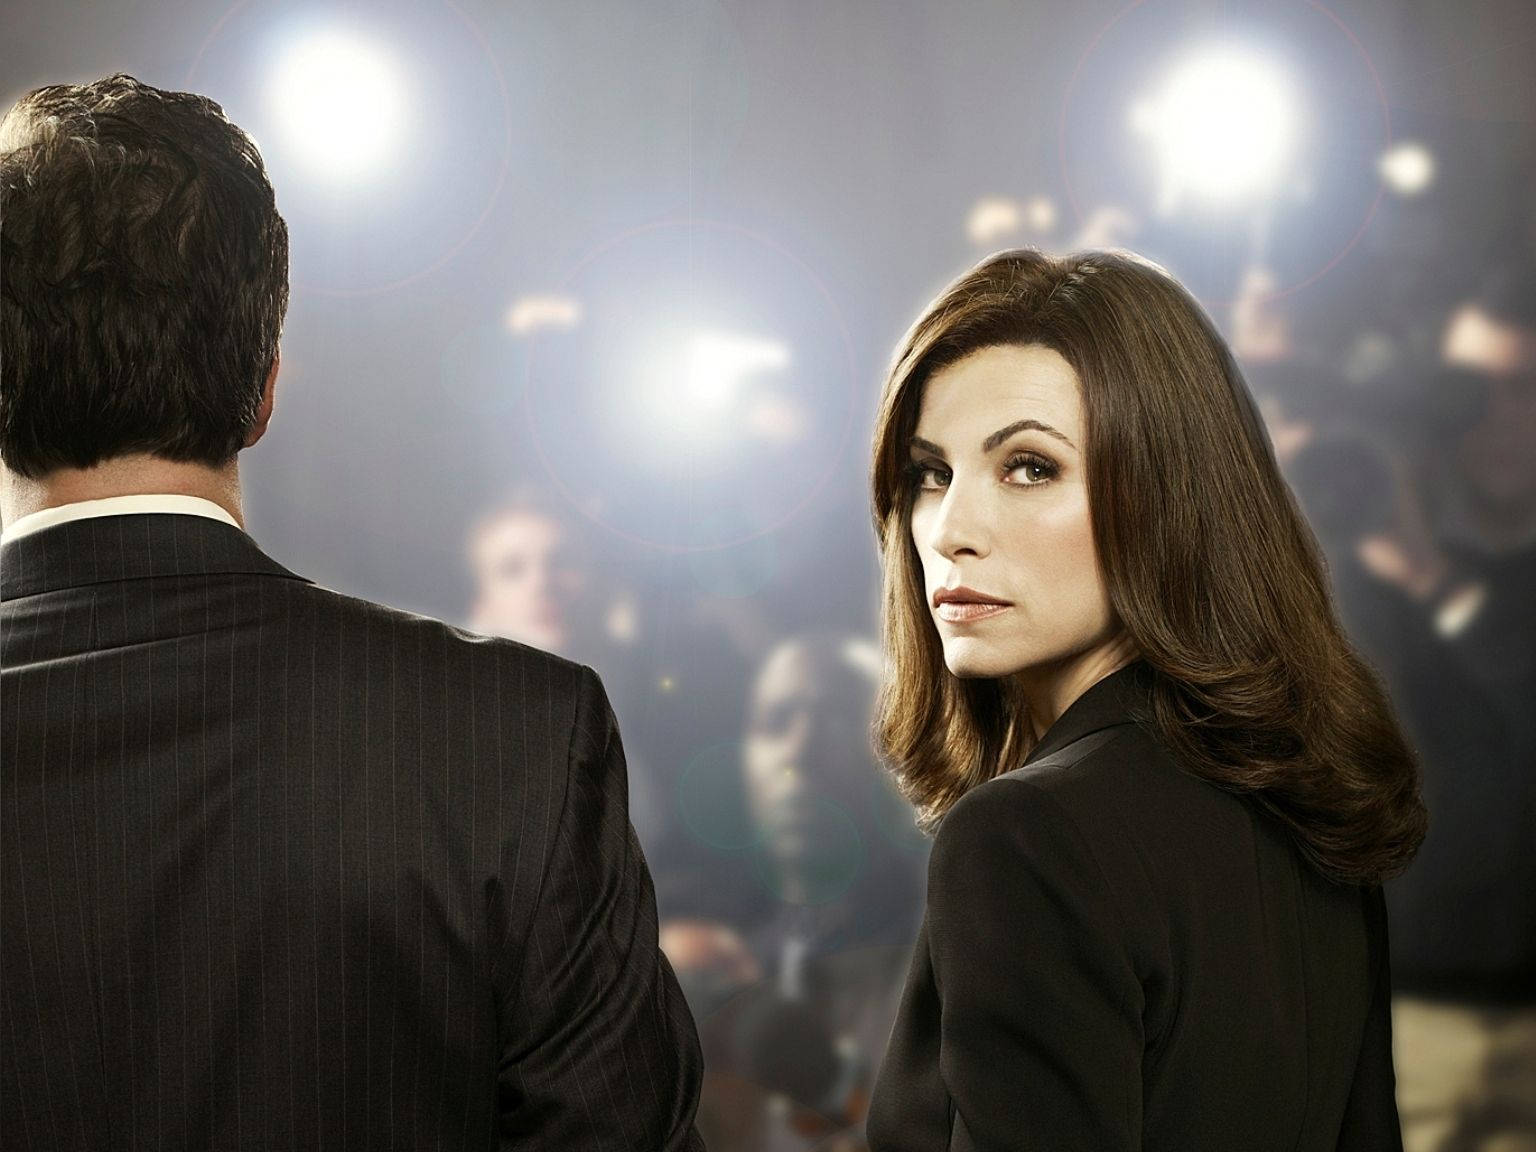 Julianna Margulies in a scene from 'The Good Wife'. Wallpaper